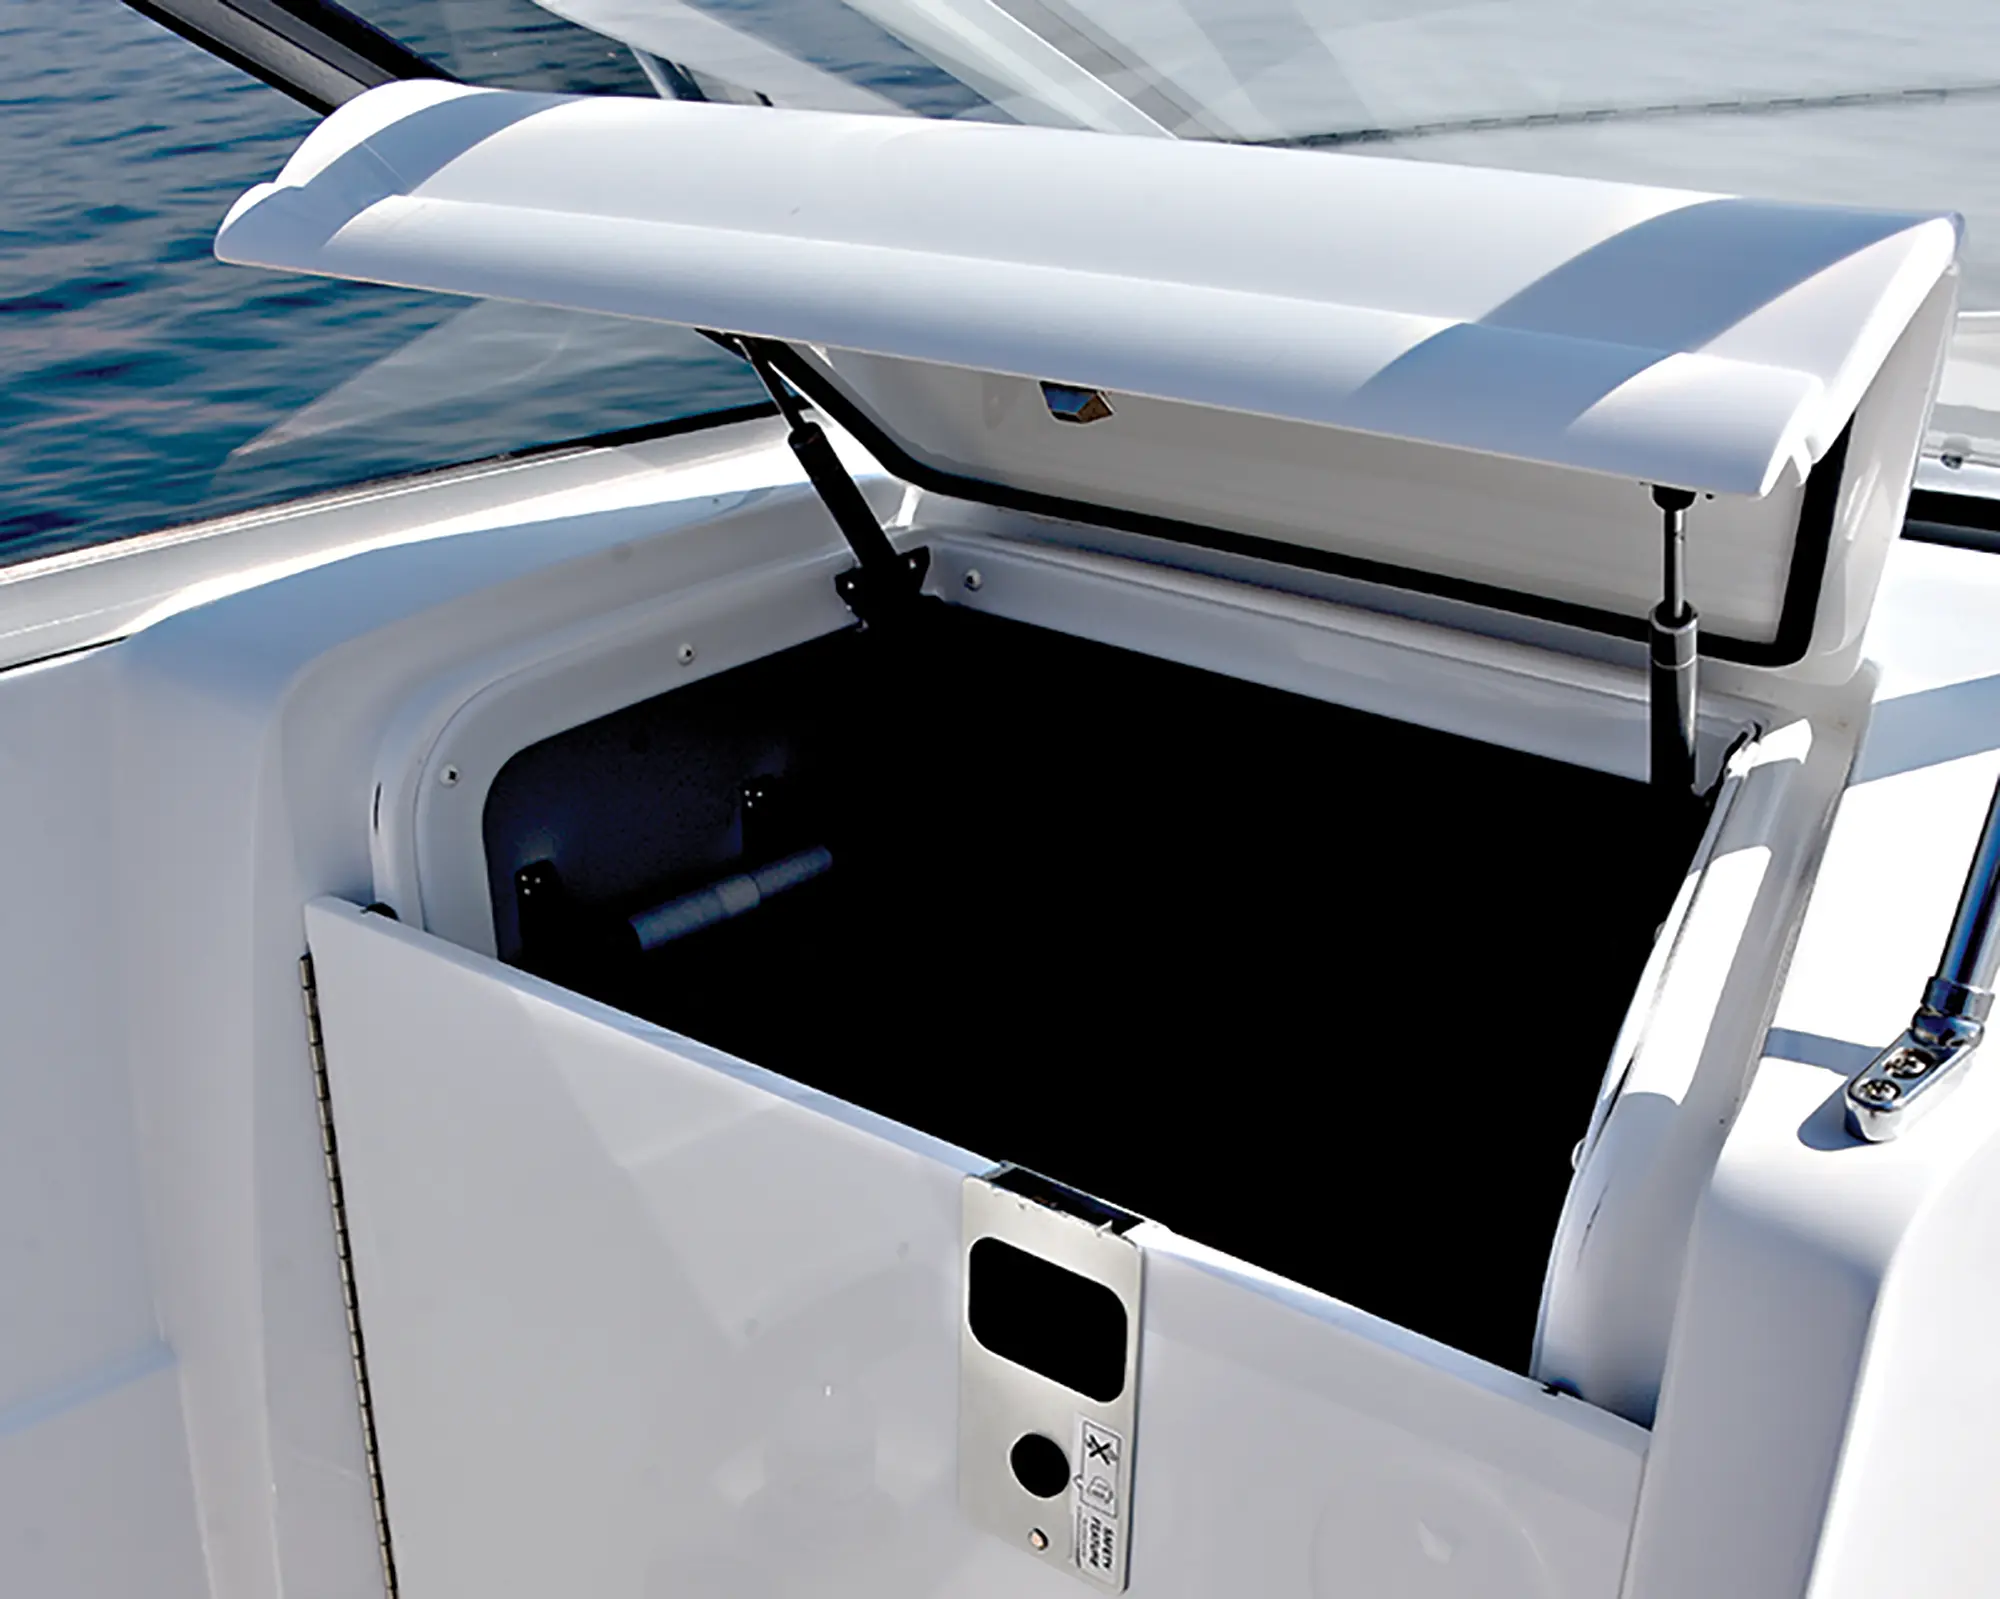 Close-up interior angle photo view of a storage space area with a door flap open in the air with plenty of room inside the storage space of the Hurricane SunDeck 235 pontoon motorboat vehicle